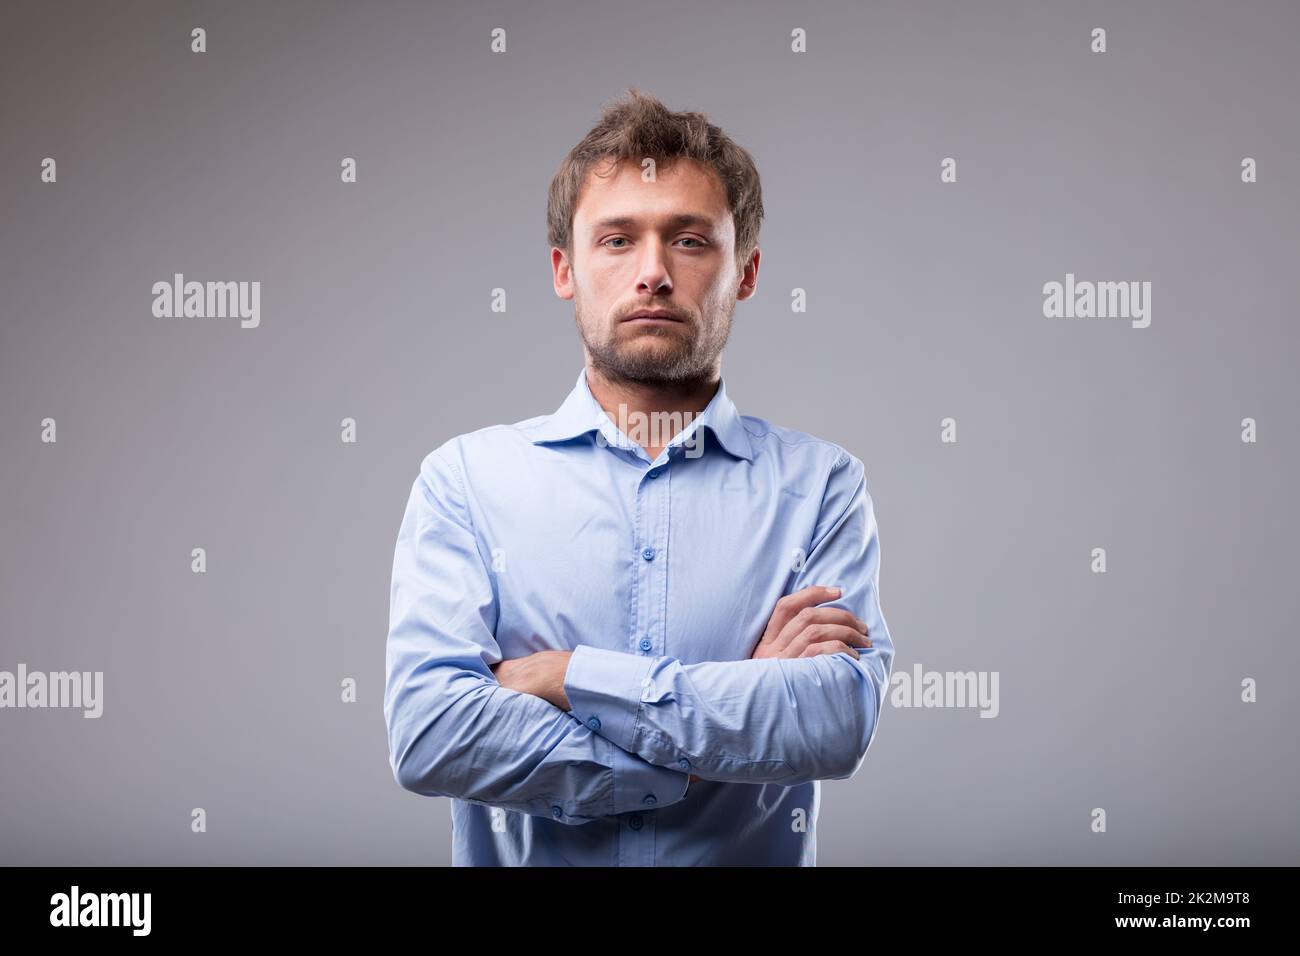 Unemotional man with a deadpan expression Stock Photo